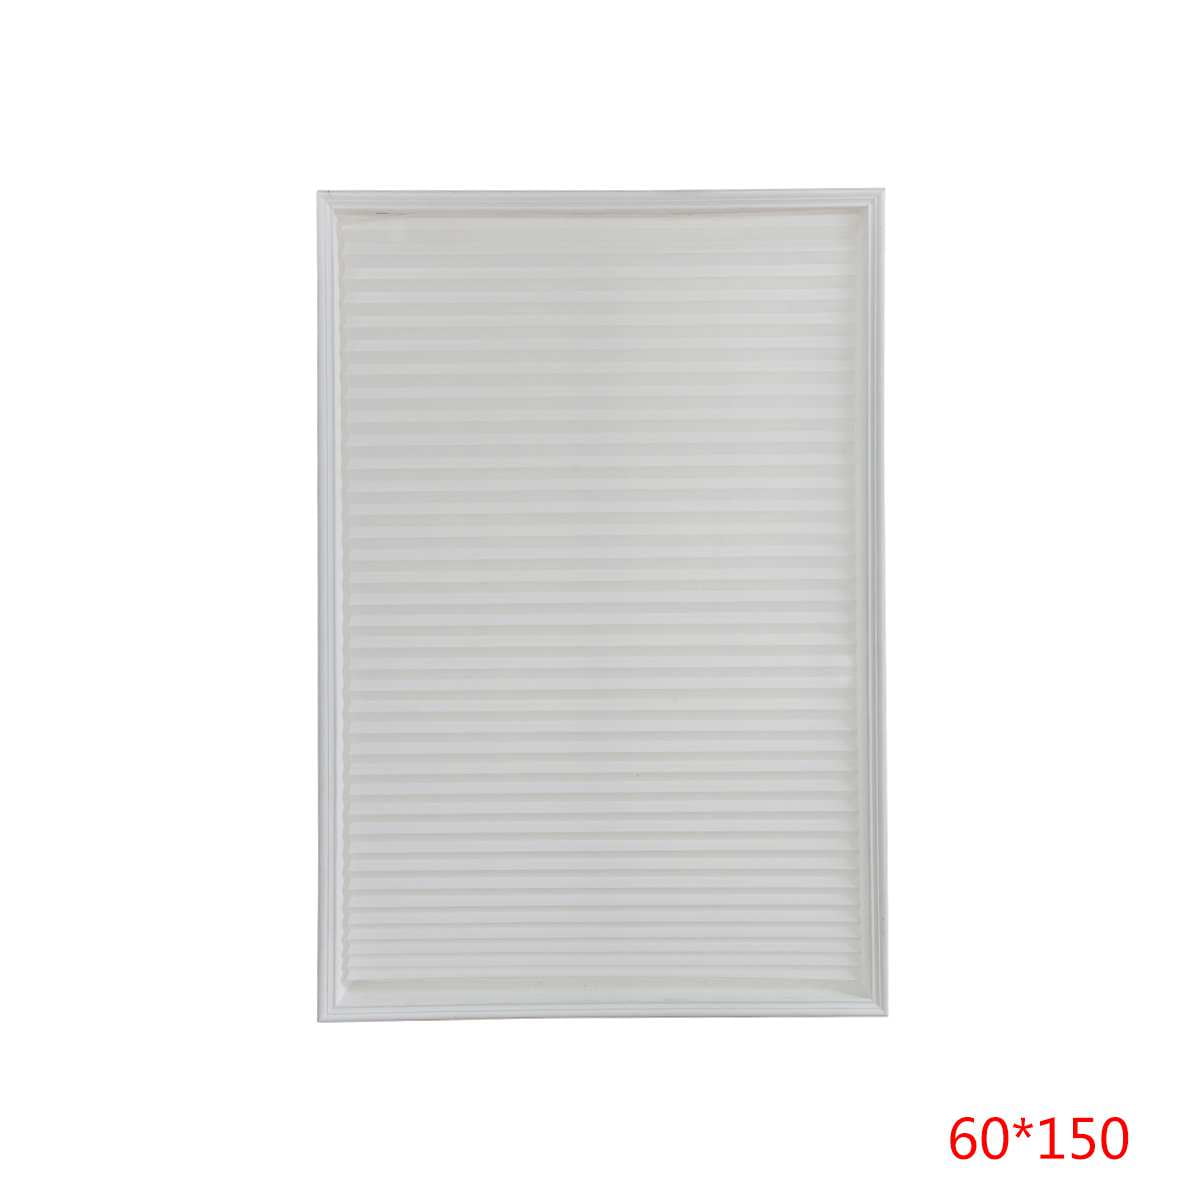 Thermal Half Blackout Roller Blinds Home Self-Adhesive Pleated Window Curtains 